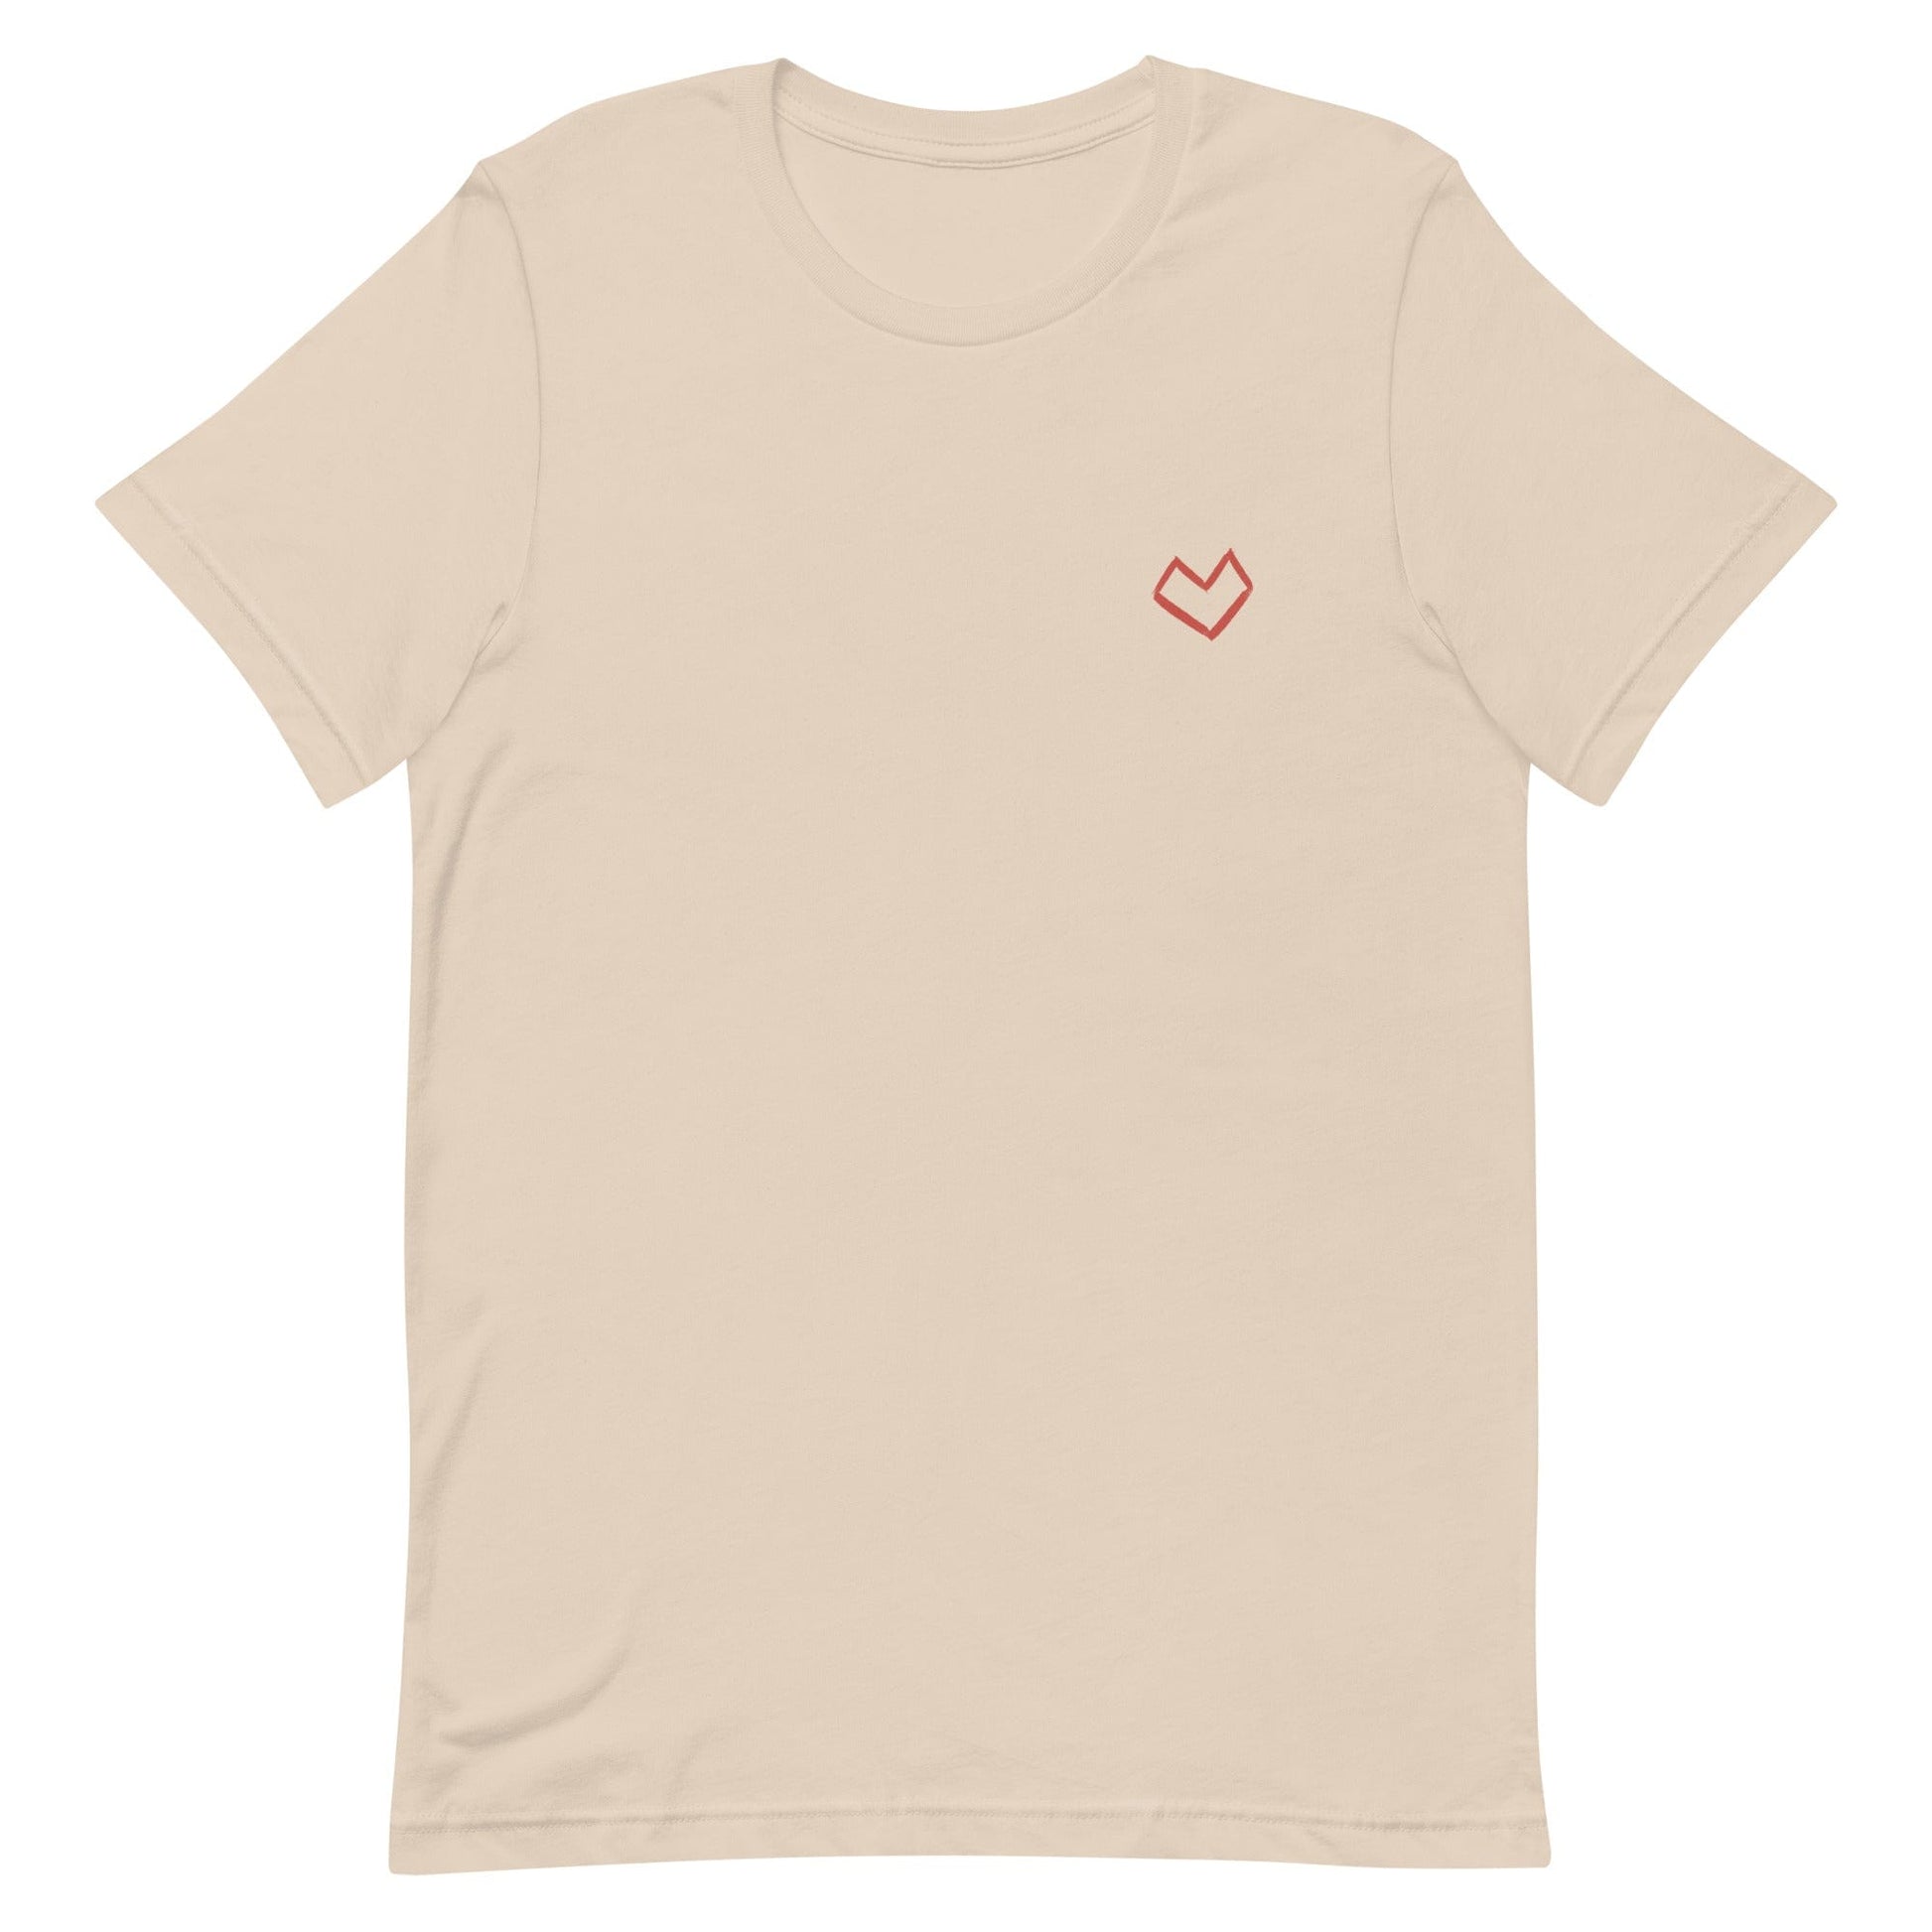 she-is-someone-feminist-t-shirt-cream-at-feminist-define-front